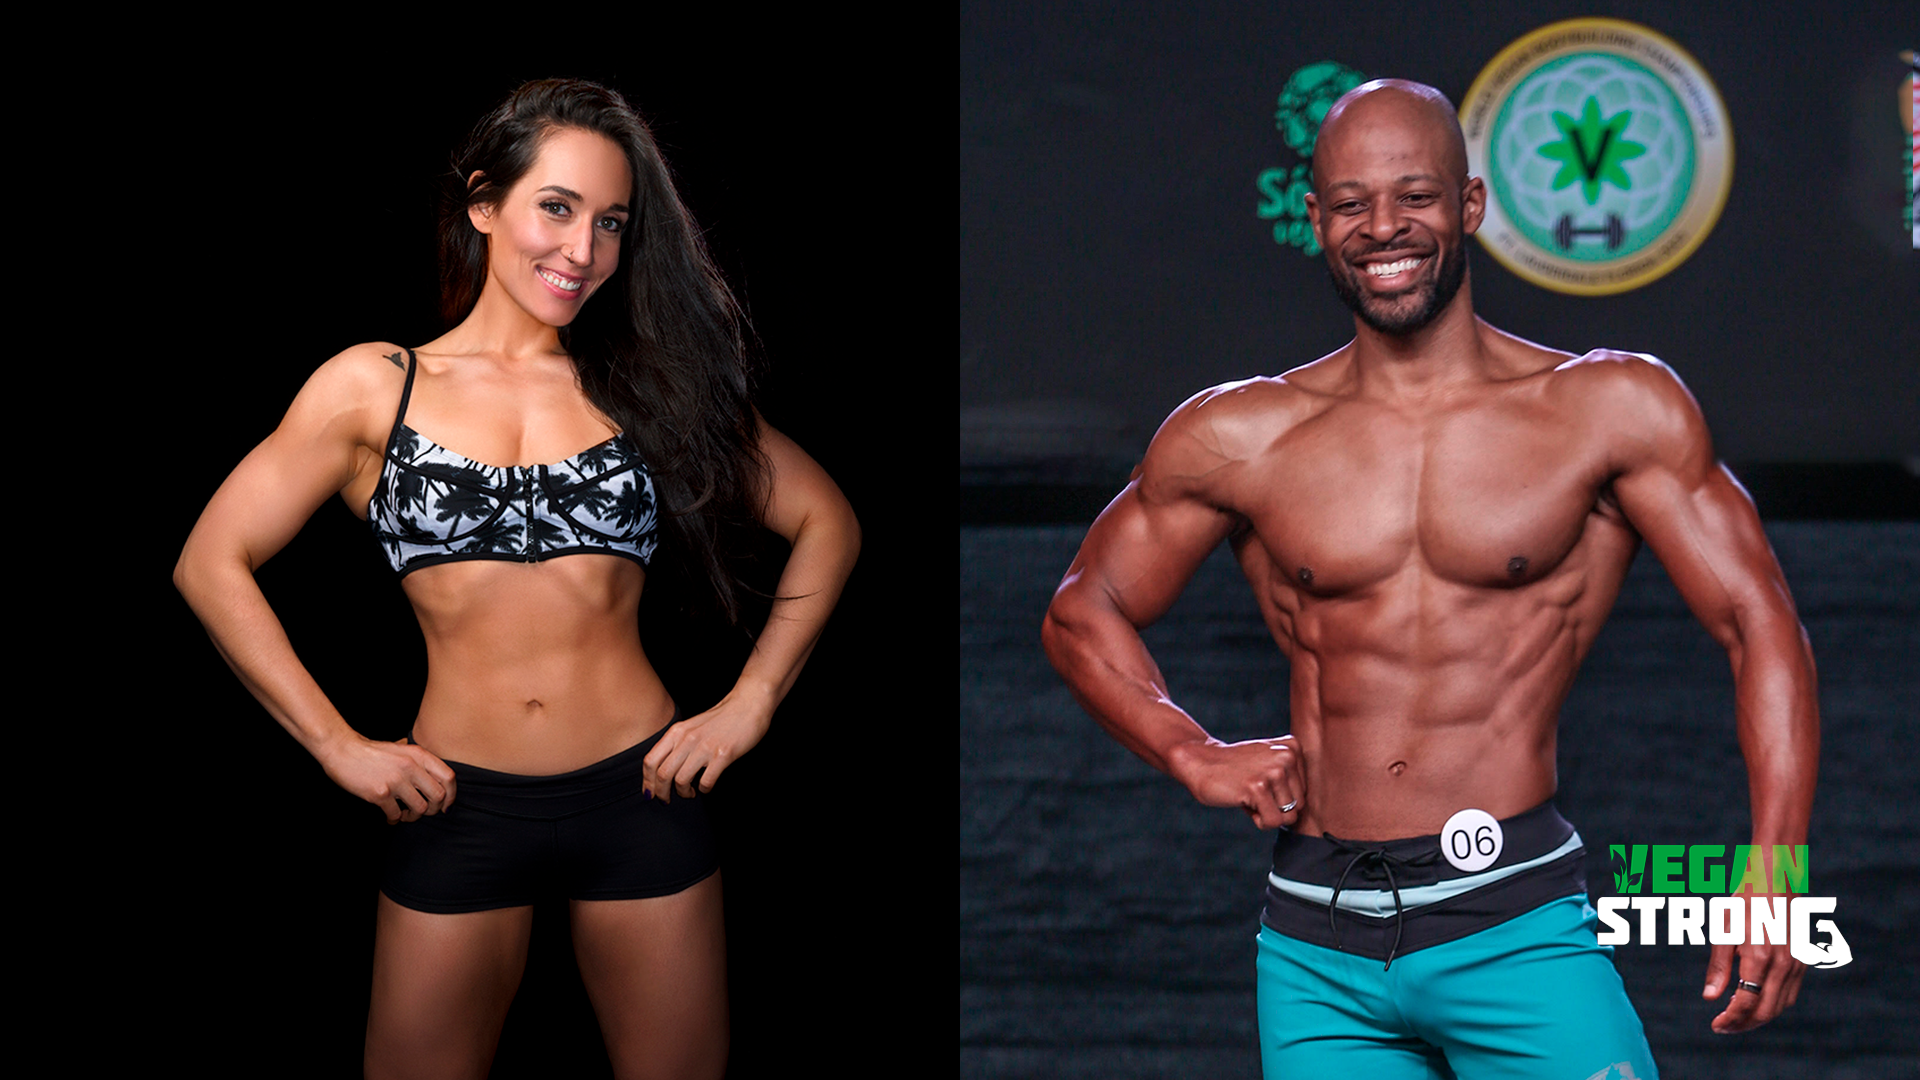 Sunday 12:30 PM – 1:00 PM<br>Bodybuilding Strategies for the Plant-Powered Vegan Strong Athlete with Dani Taylor & Jamal Collins